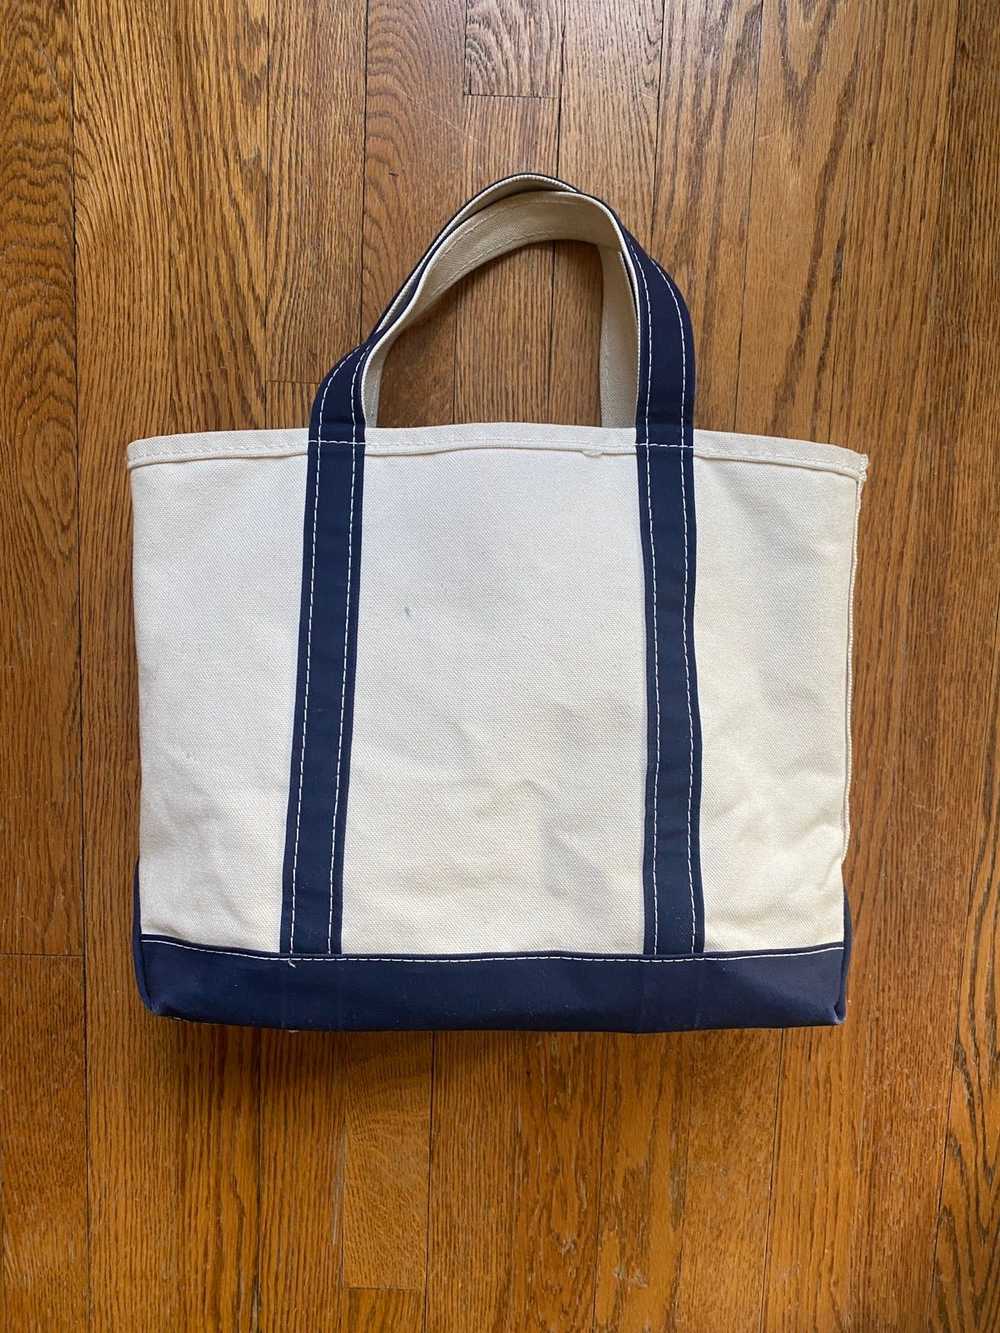 L.L. Bean LL Bean Embroidered Boat Tote - image 2